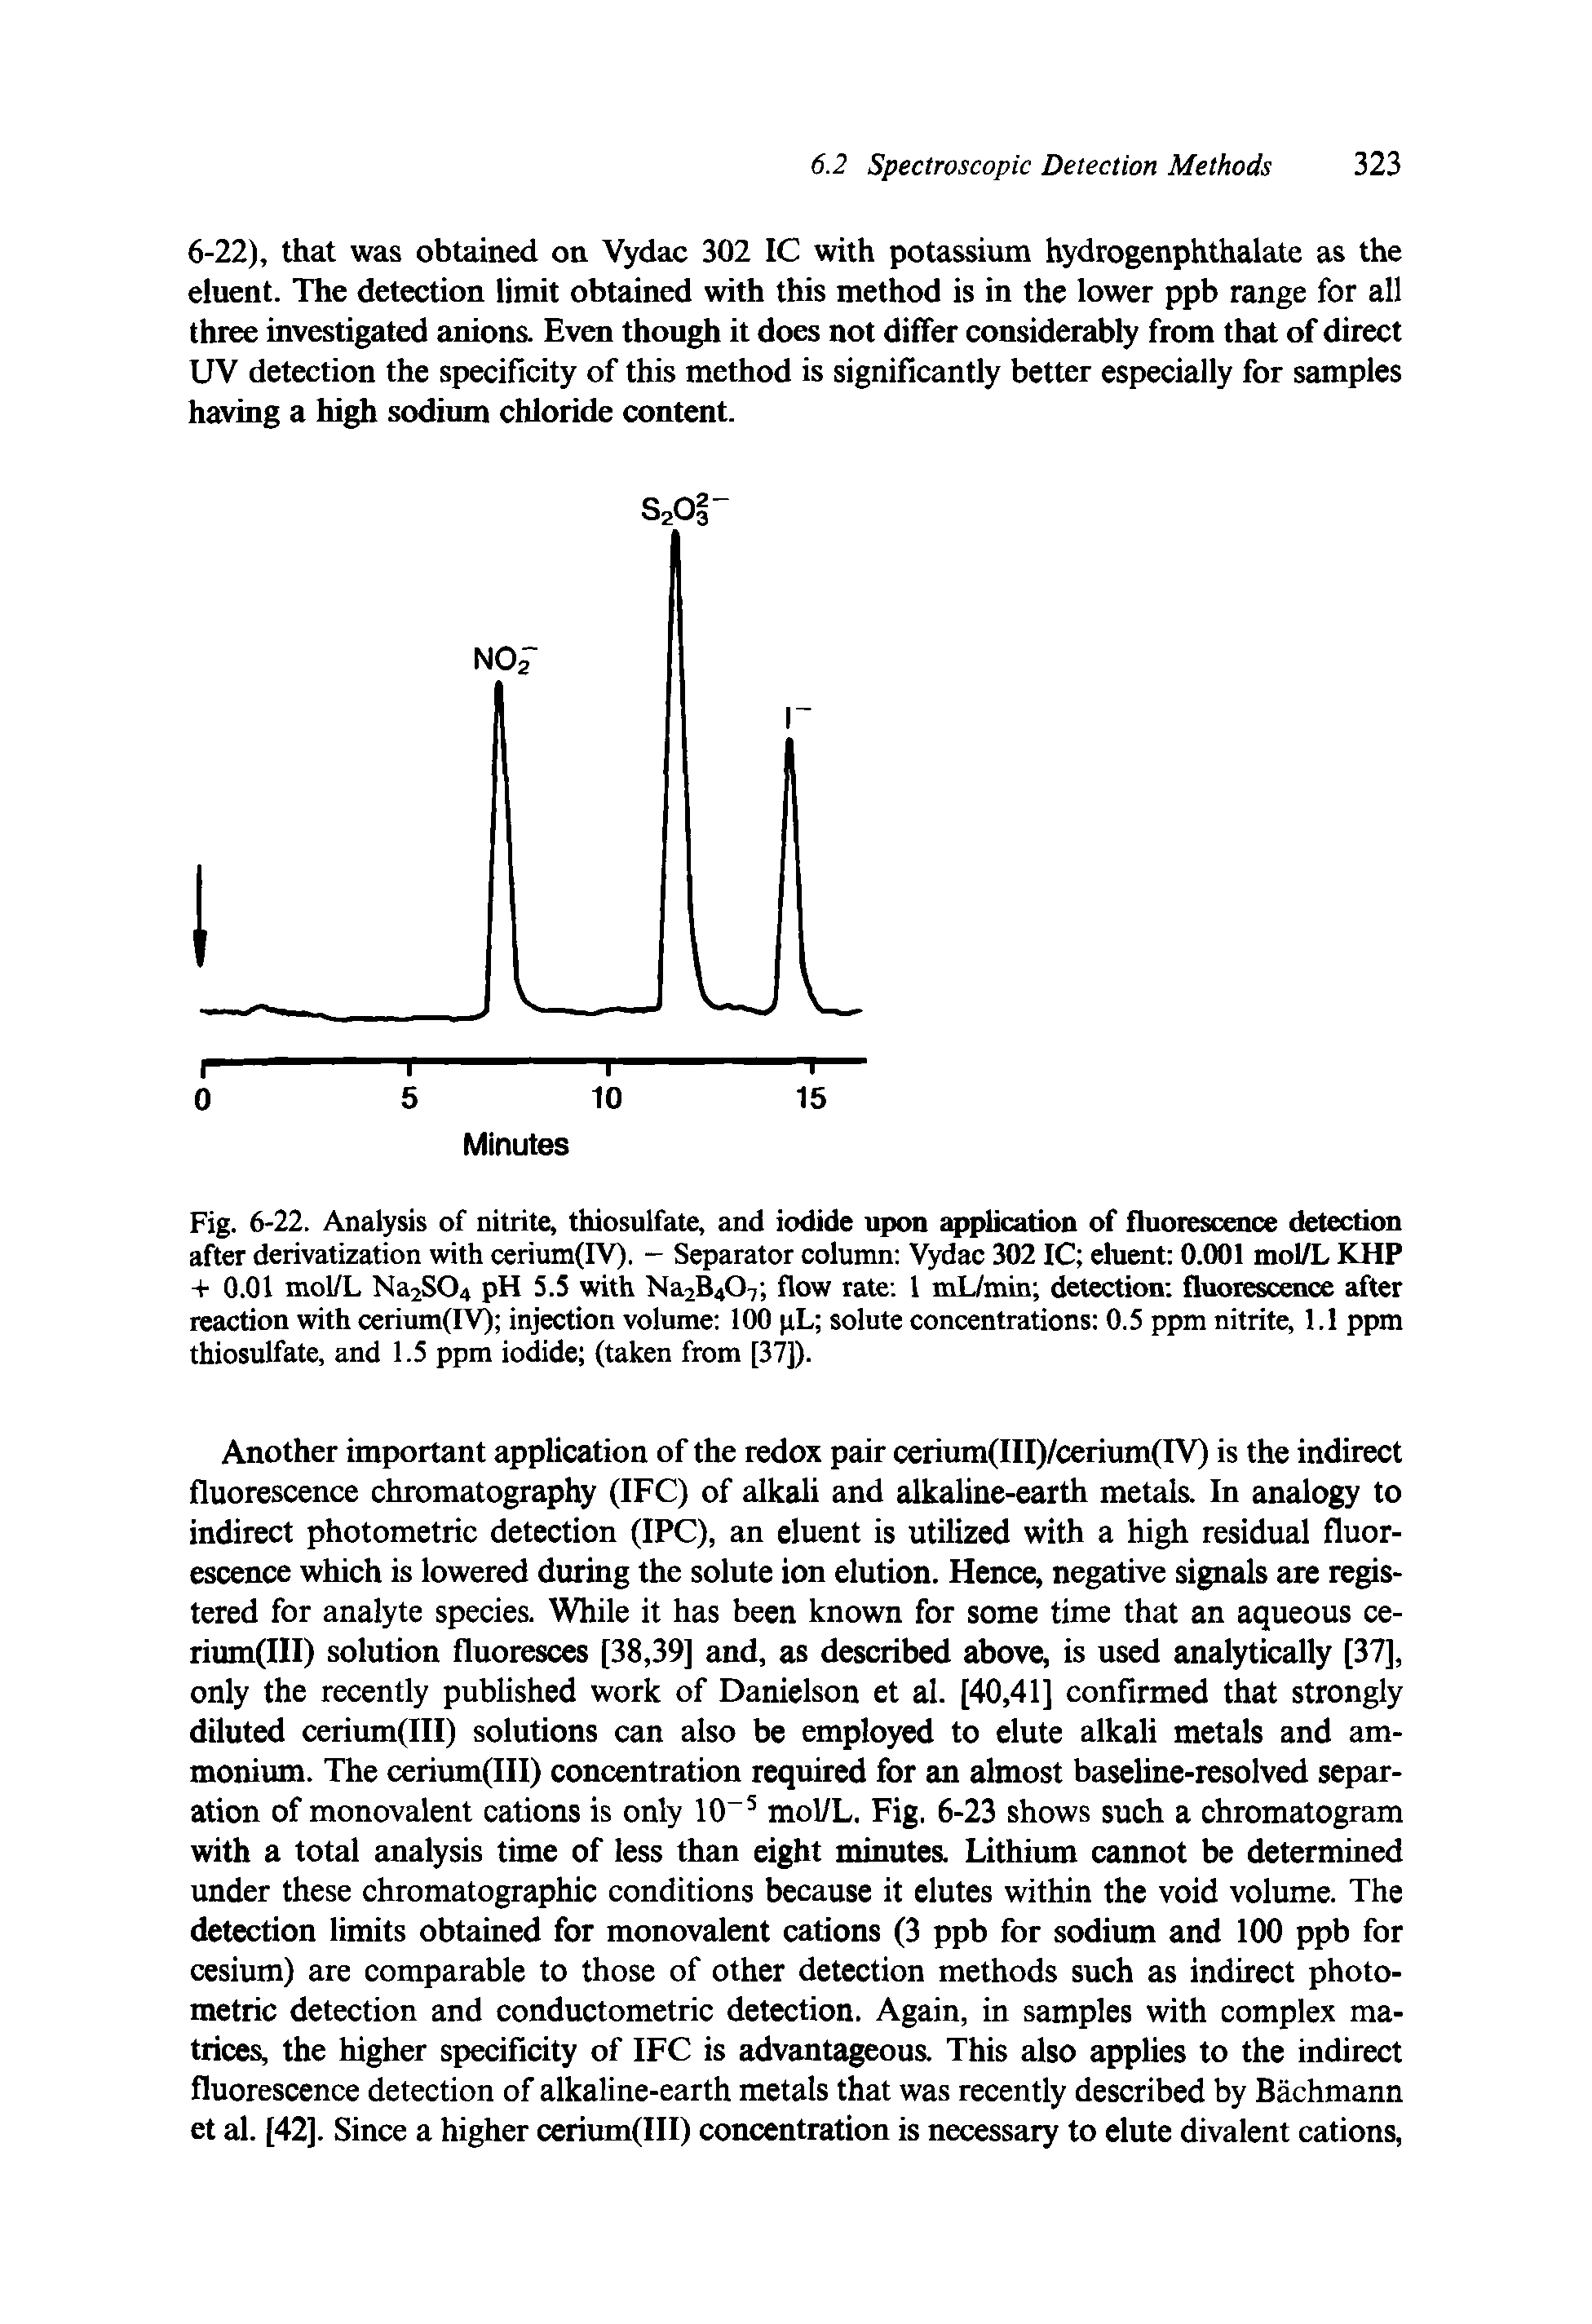 Fig. 6-22. Analysis of nitrite, thiosulfate, and iodide upon application of fluorescence detection after derivatization with cerium(IV). — Separator column Vydac 302 IC eluent 0.001 mol/L KHP + 0.01 mol/L Na2S04 pH 5.5 with Na2B407 flow rate 1 mL/min detection fluorescence after reaction with cerium(IV) injection volume 100 pL solute concentrations 0.5 ppm nitrite, 1.1 ppm thiosulfate, and 1.5 ppm iodide (taken from [37]).